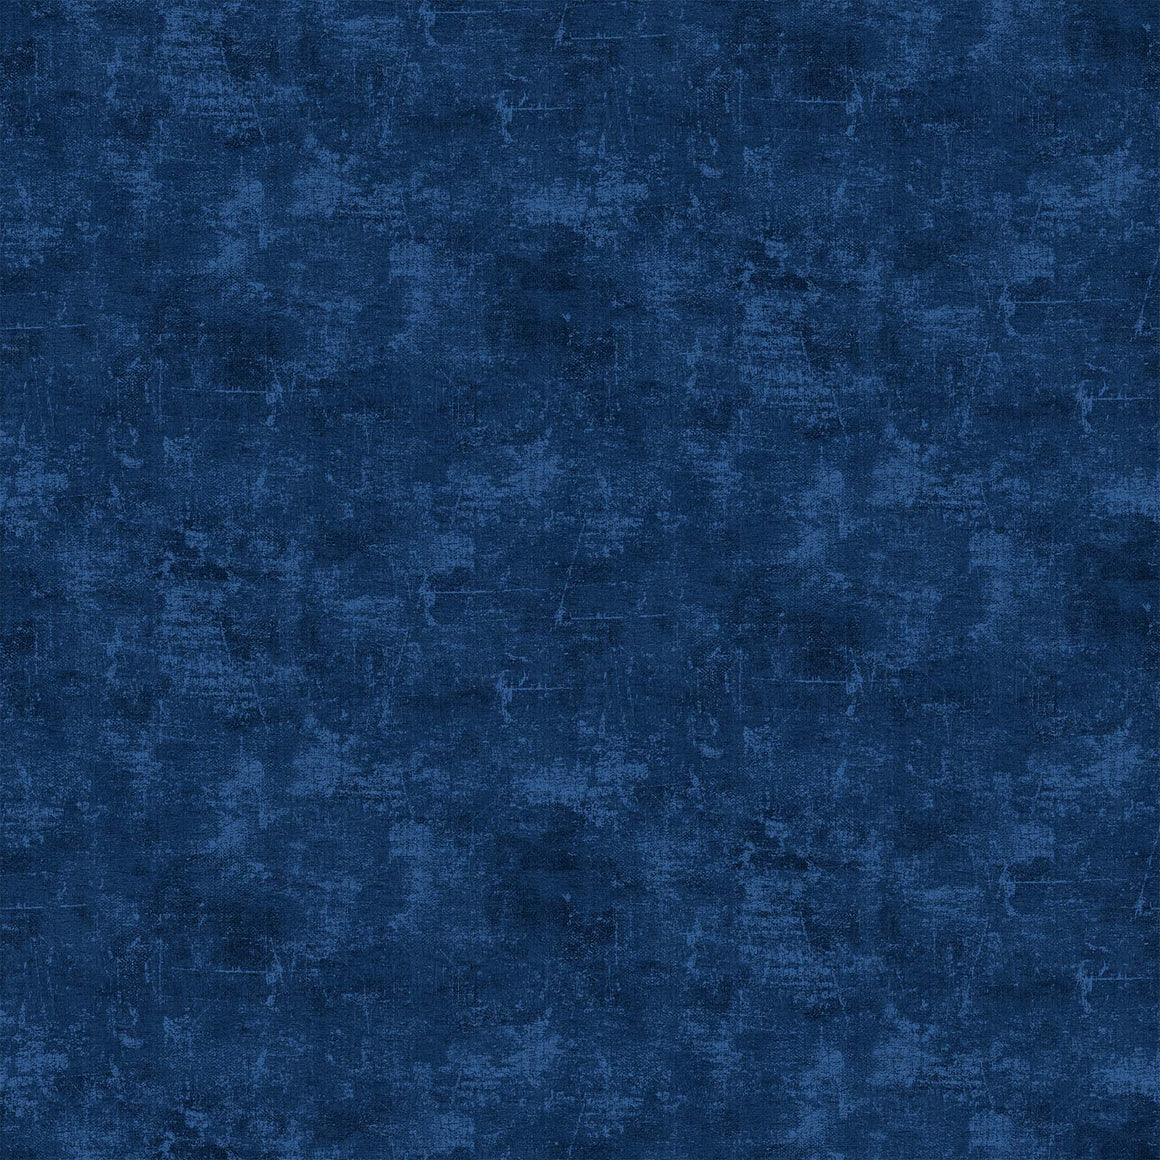 Navy - Canvas Texture - 9030-49, Designer Fabric, Northcott, [variant_title] - Mad About Patchwork